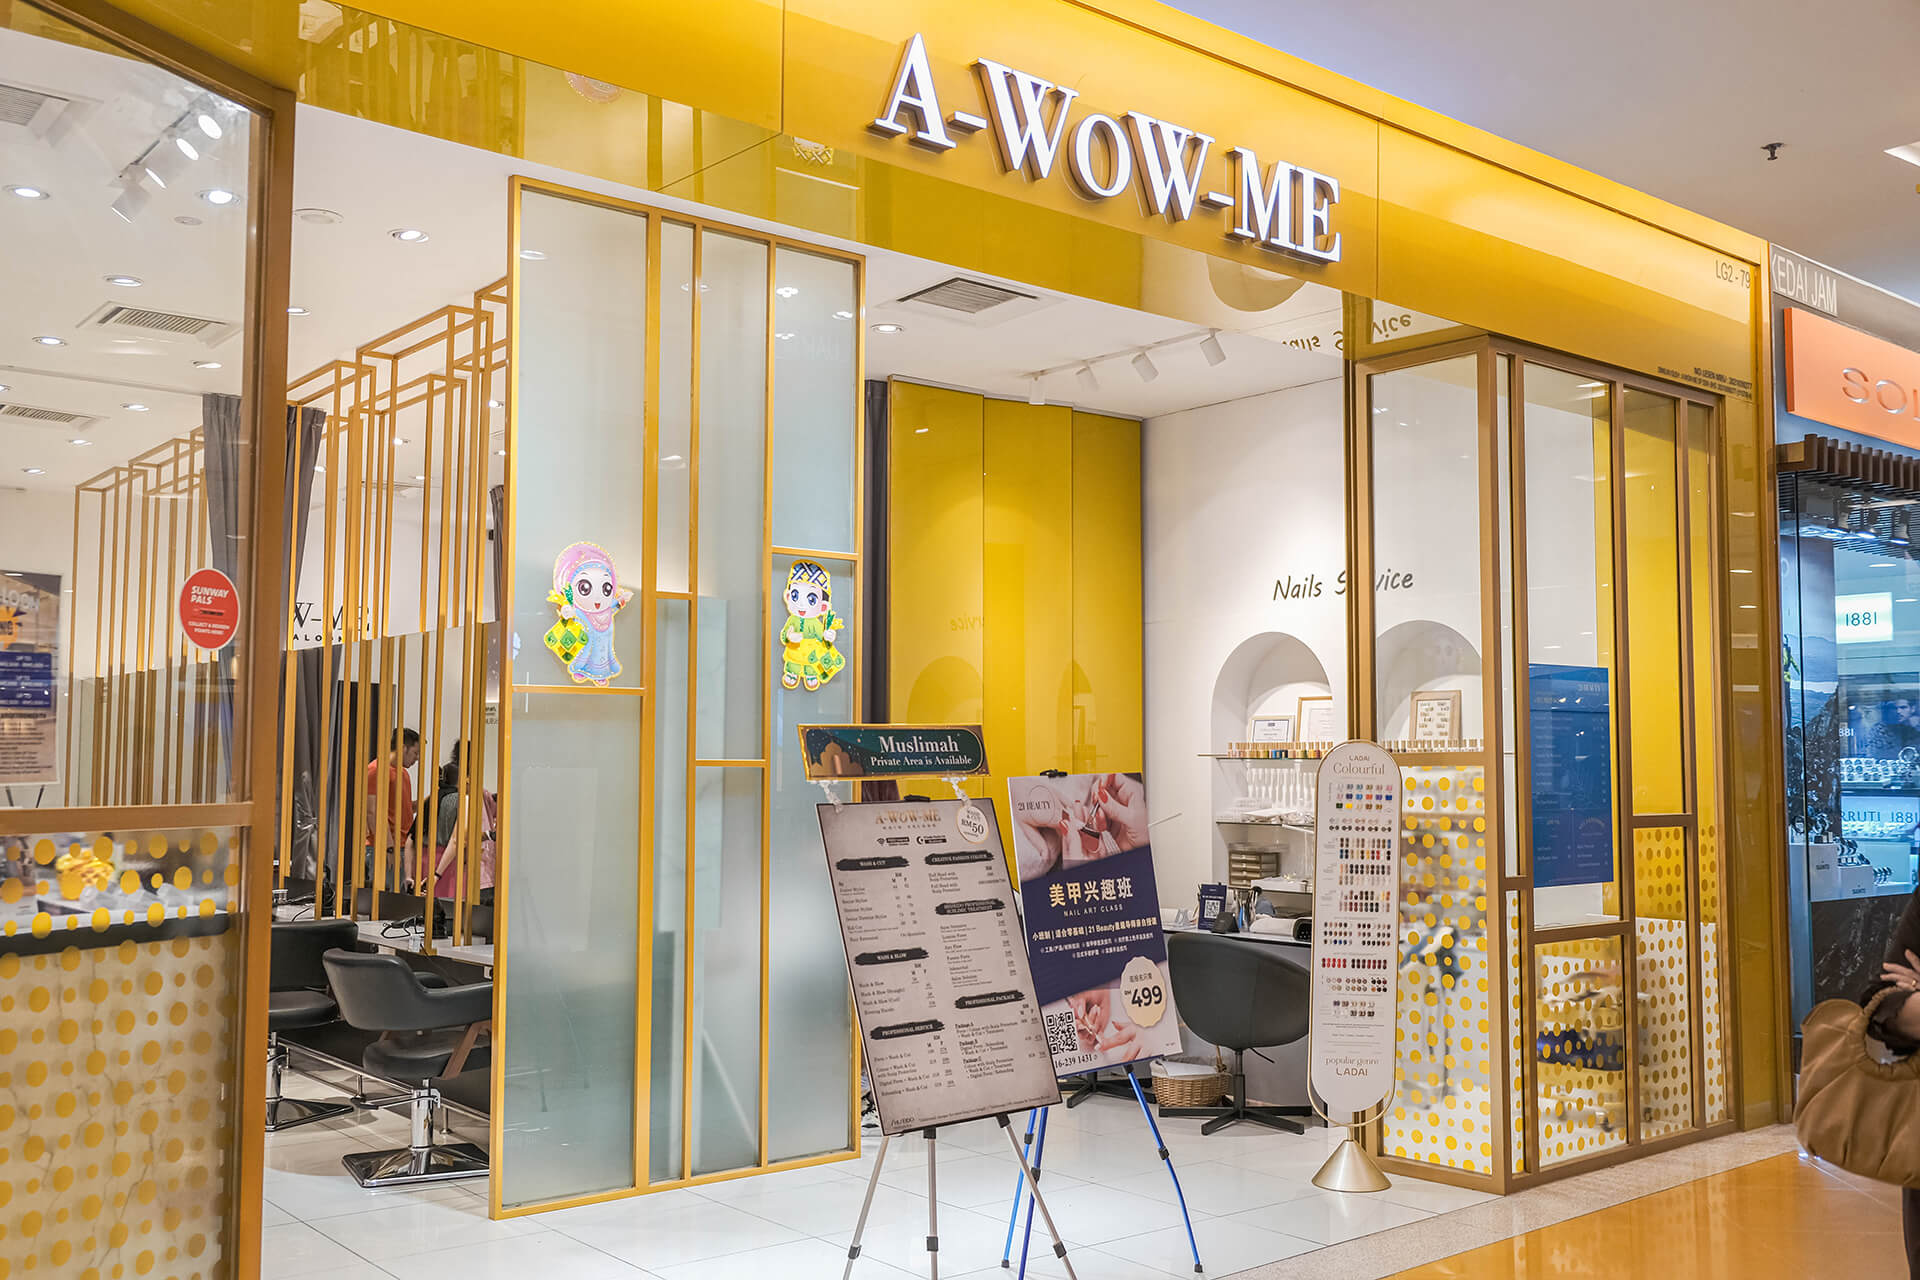 Get cosy for a luxurious hairdo at A-WoW-Me, Sunway Pyramid!